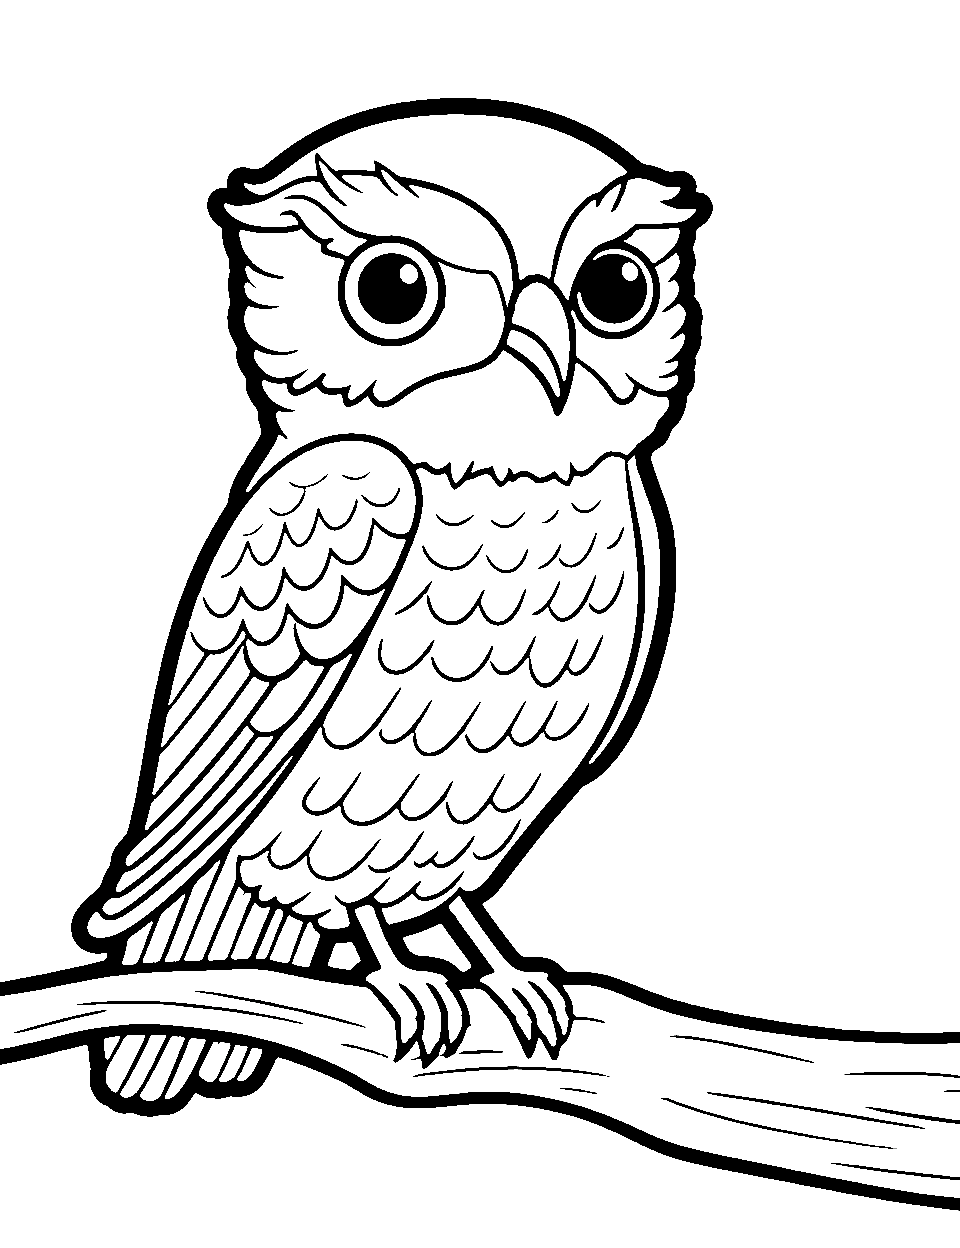 Owl Outpost Coloring Page - An owl perched on a tree branch.